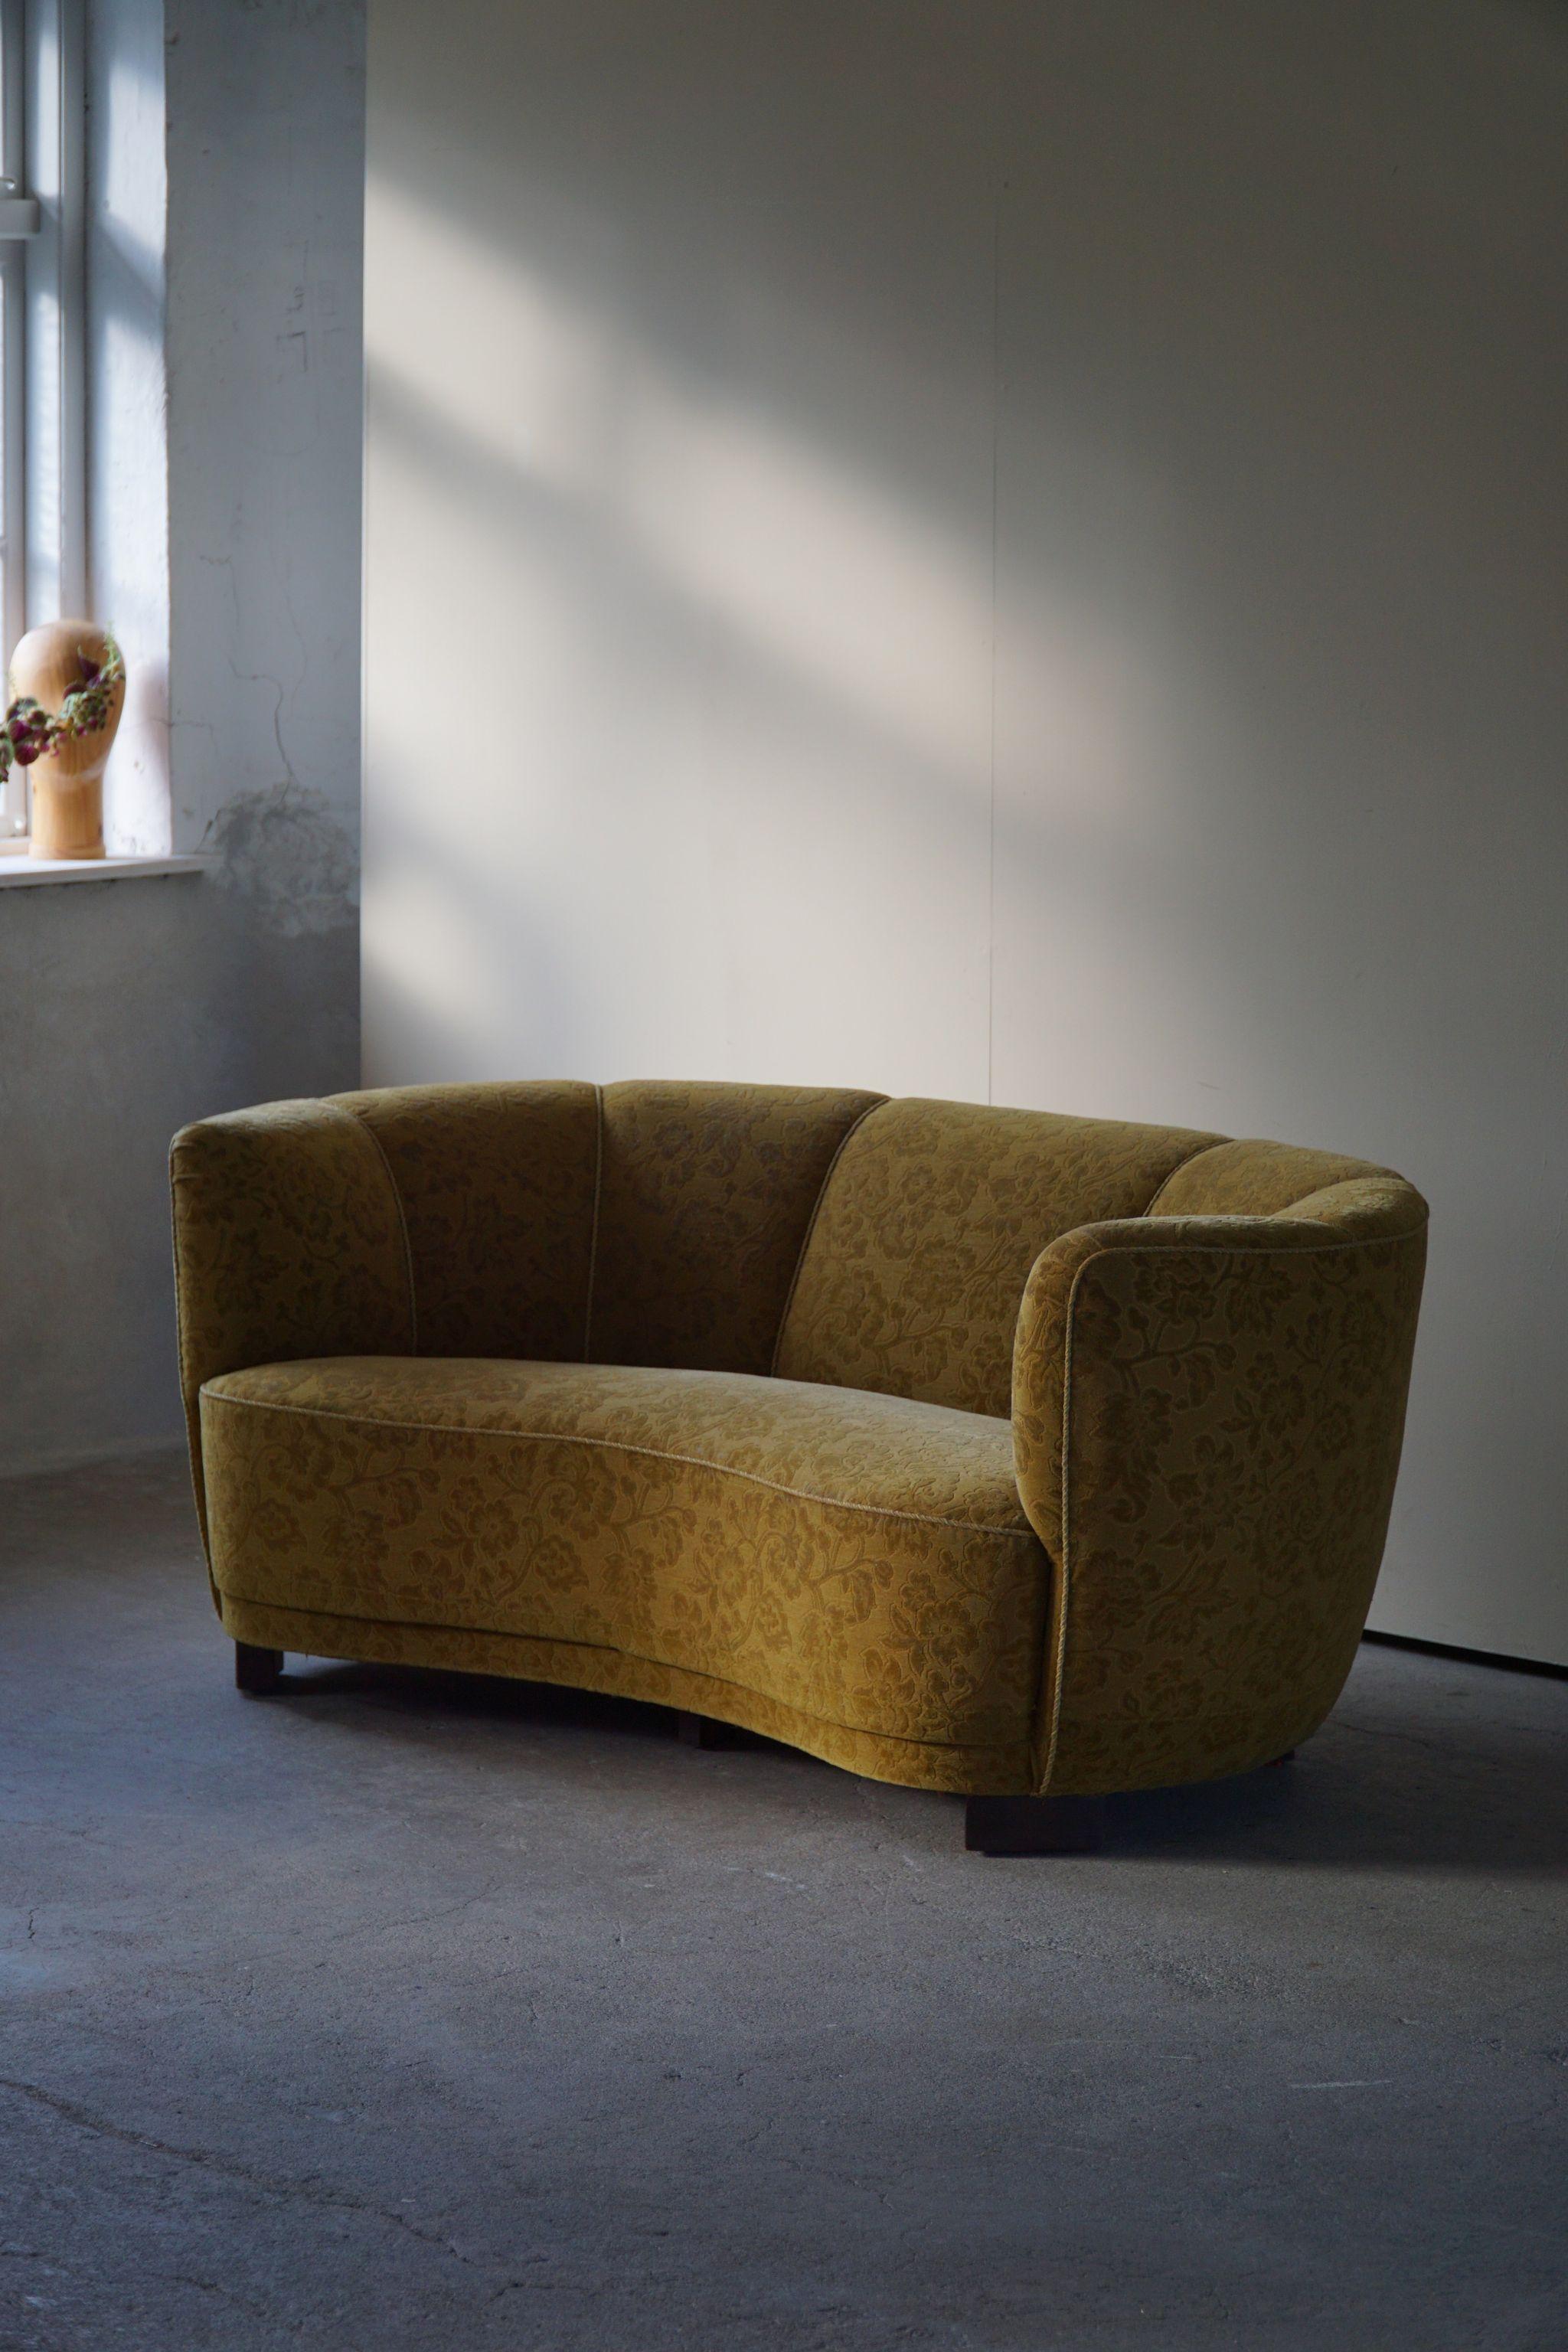 Curved great quality banana sofa with chunky legs in its original fabric. Made by a Danish cabinetmaker in the 1940s. Shapes are on point and have an intriguing look that fits nicely into a modern interior This classic banan sofa will complement